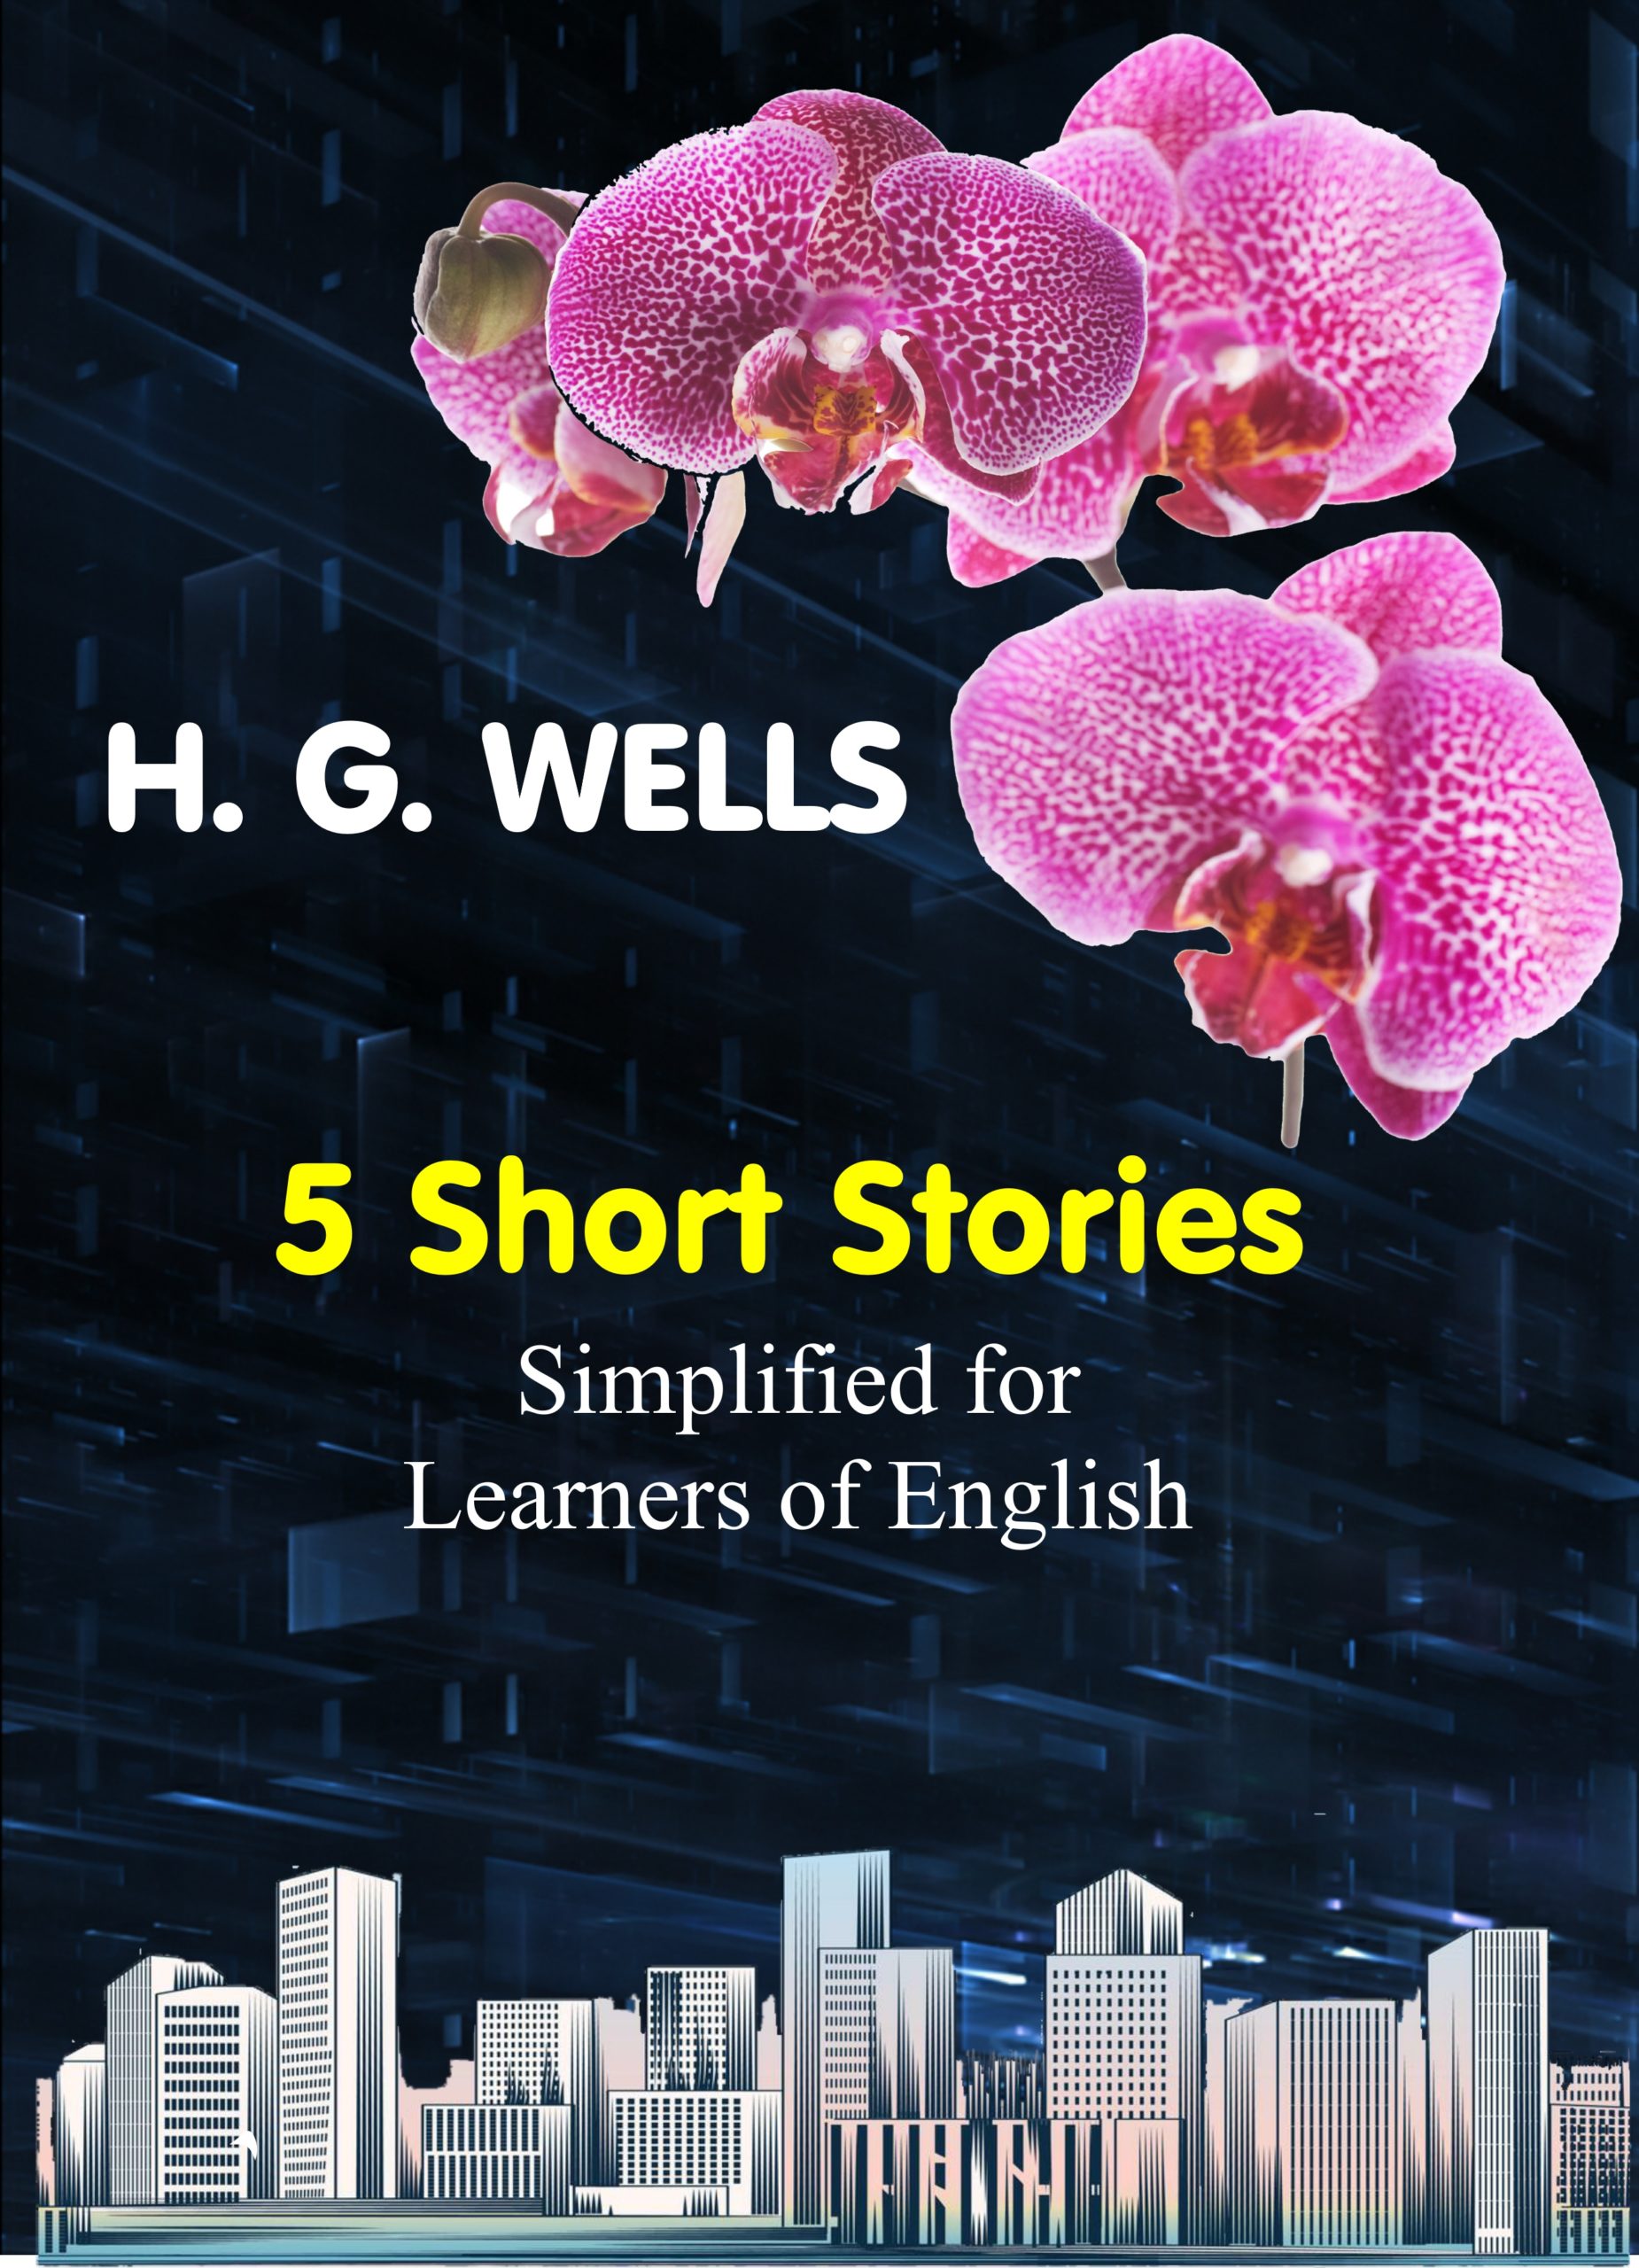 5 Short stories by H.G. Wells cover